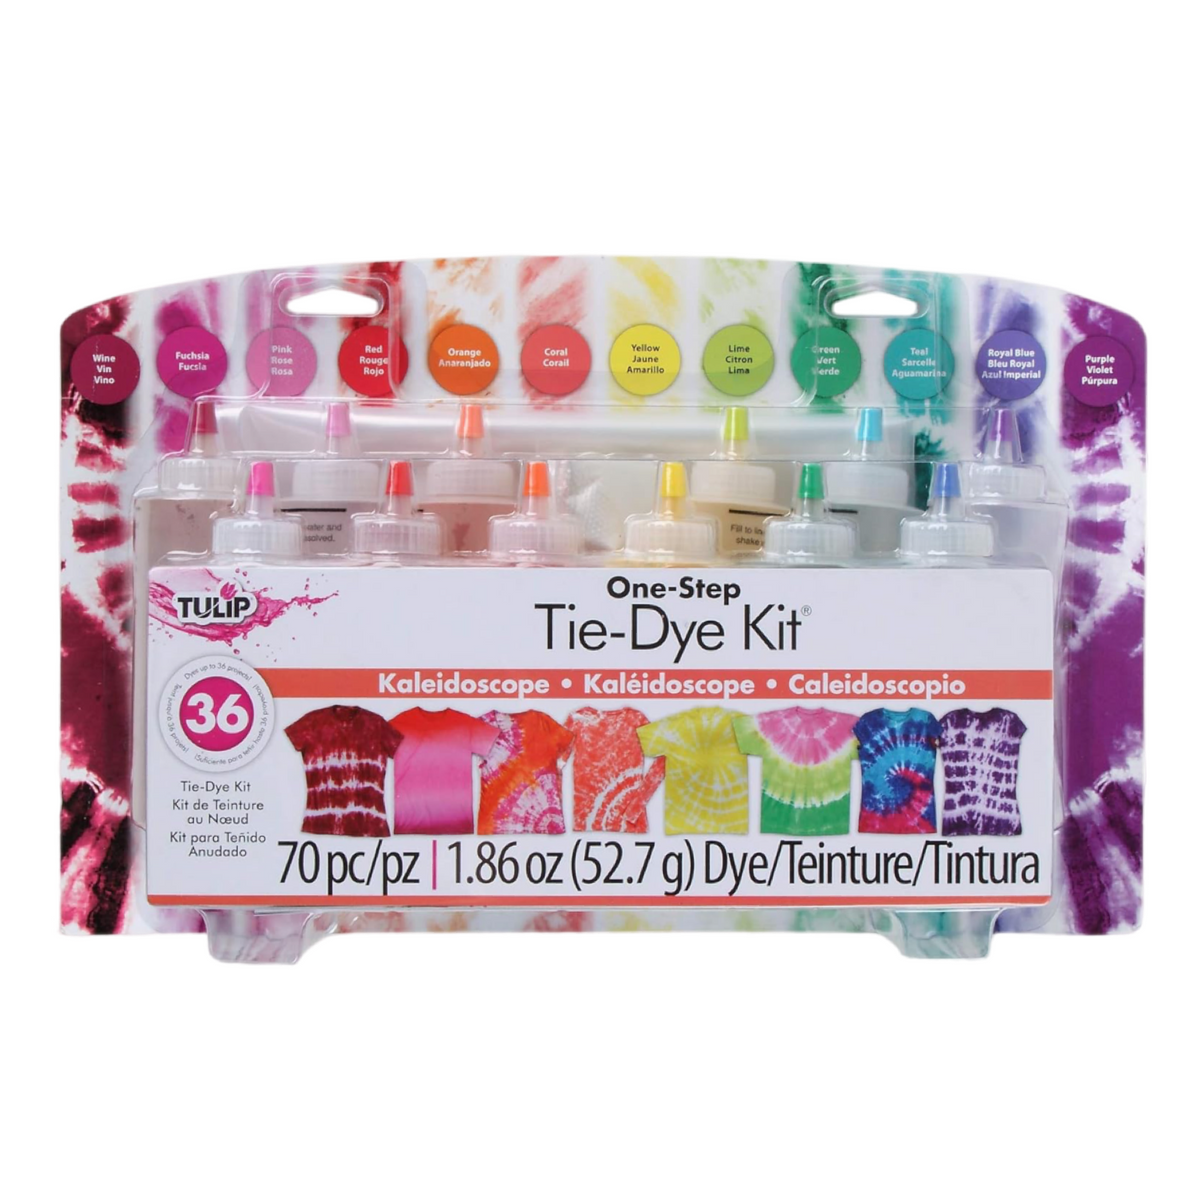 70pc Tulip Kaleidoscope One-Step Tie-Dye Kit - 12 Colors, 36 Projects!